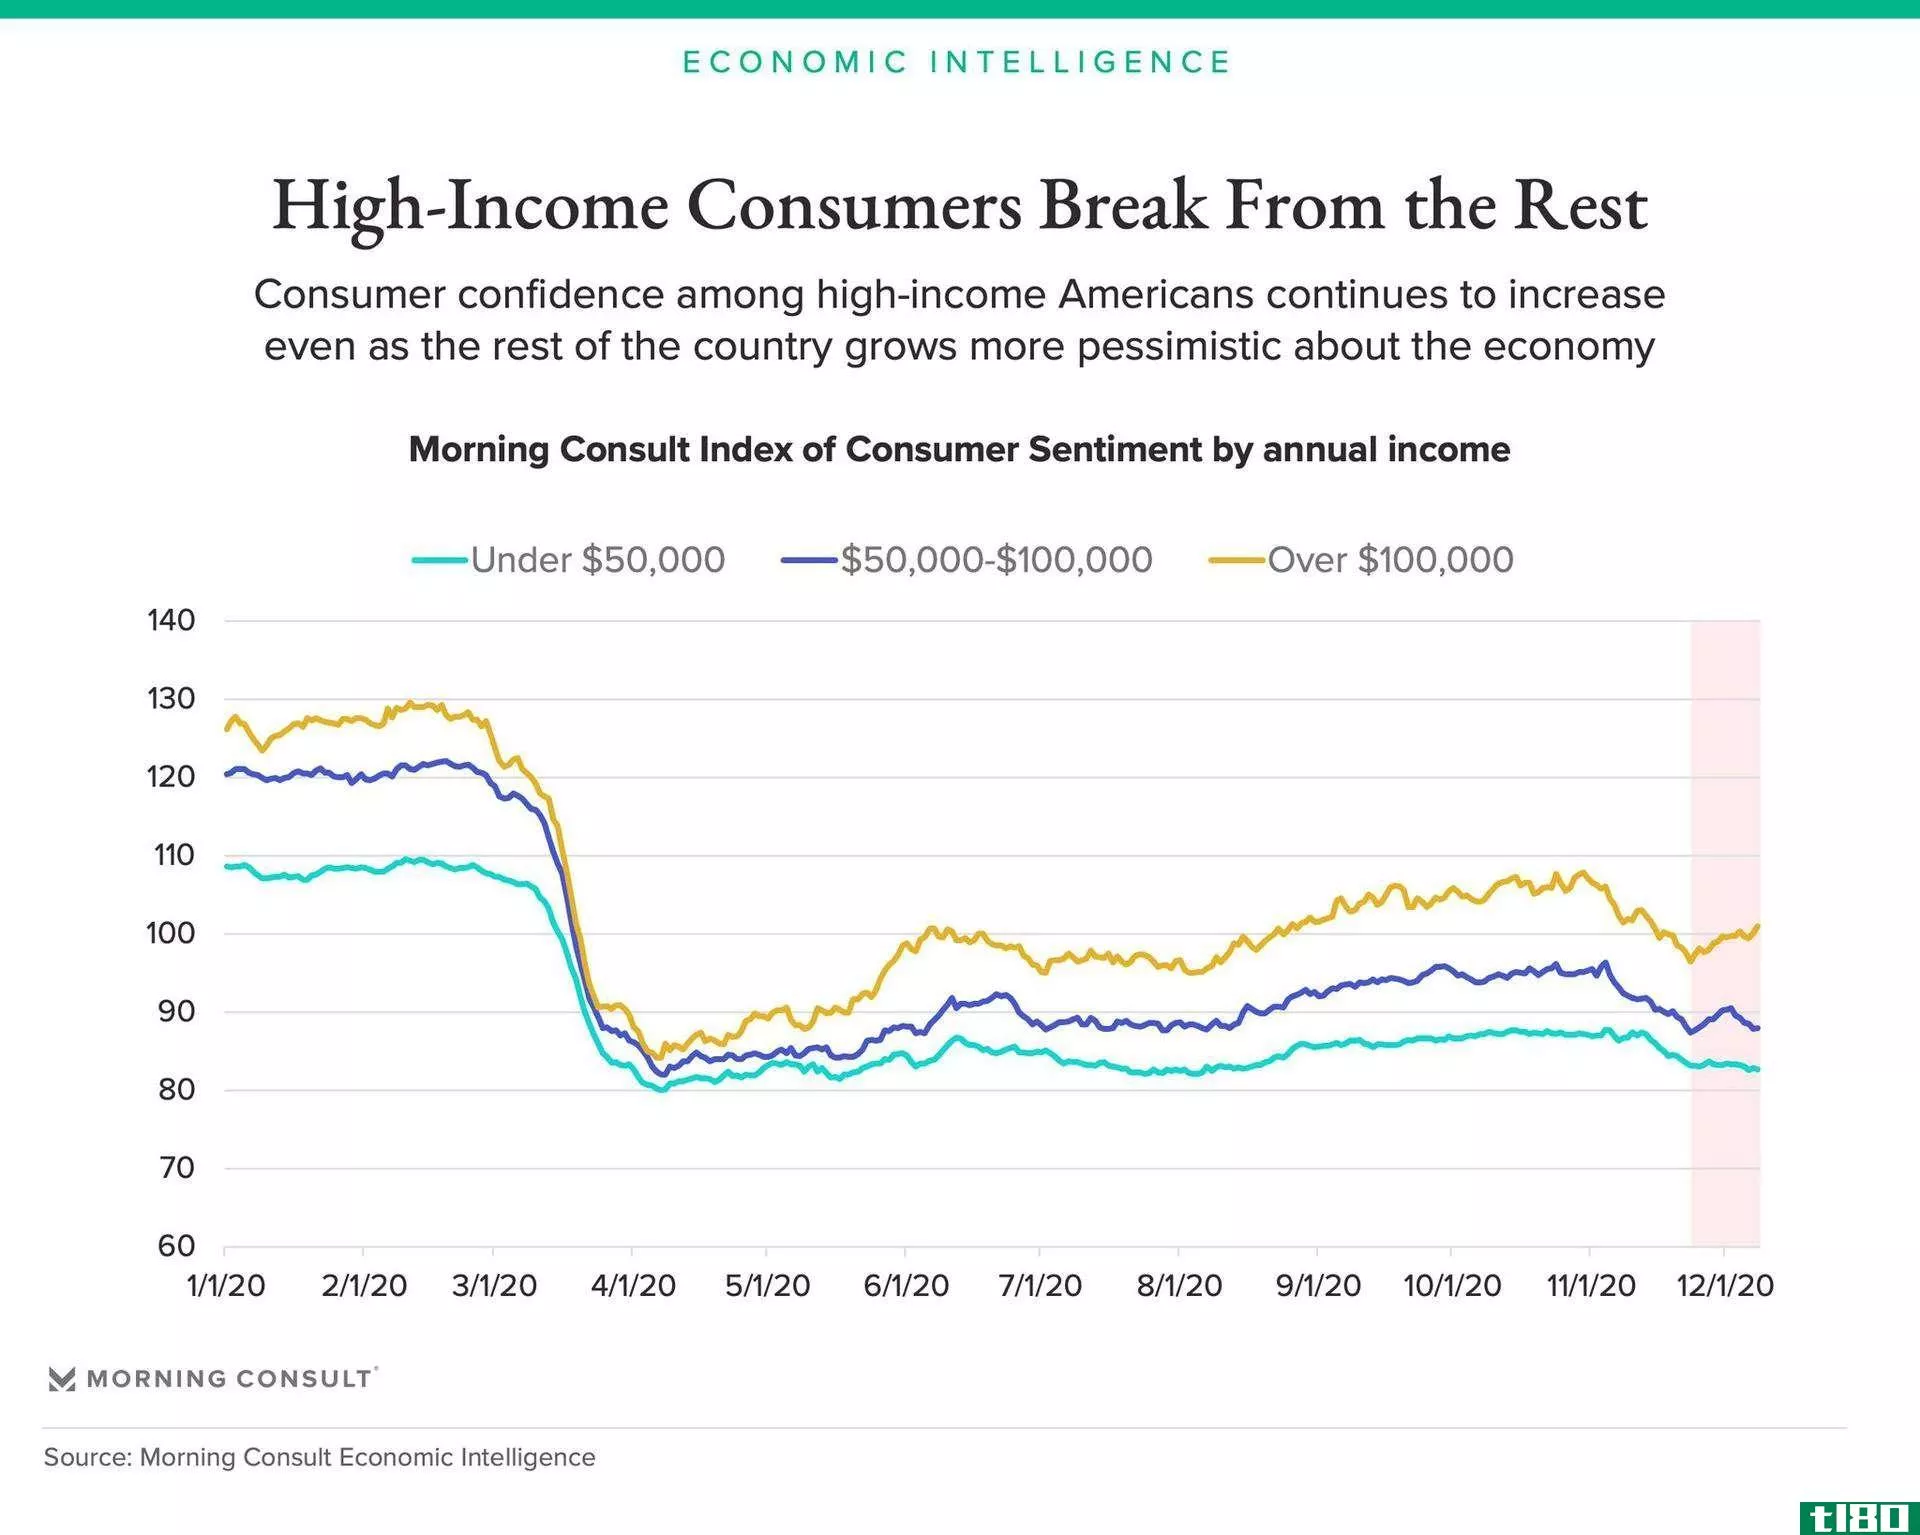 High-income c***umers break from the rest